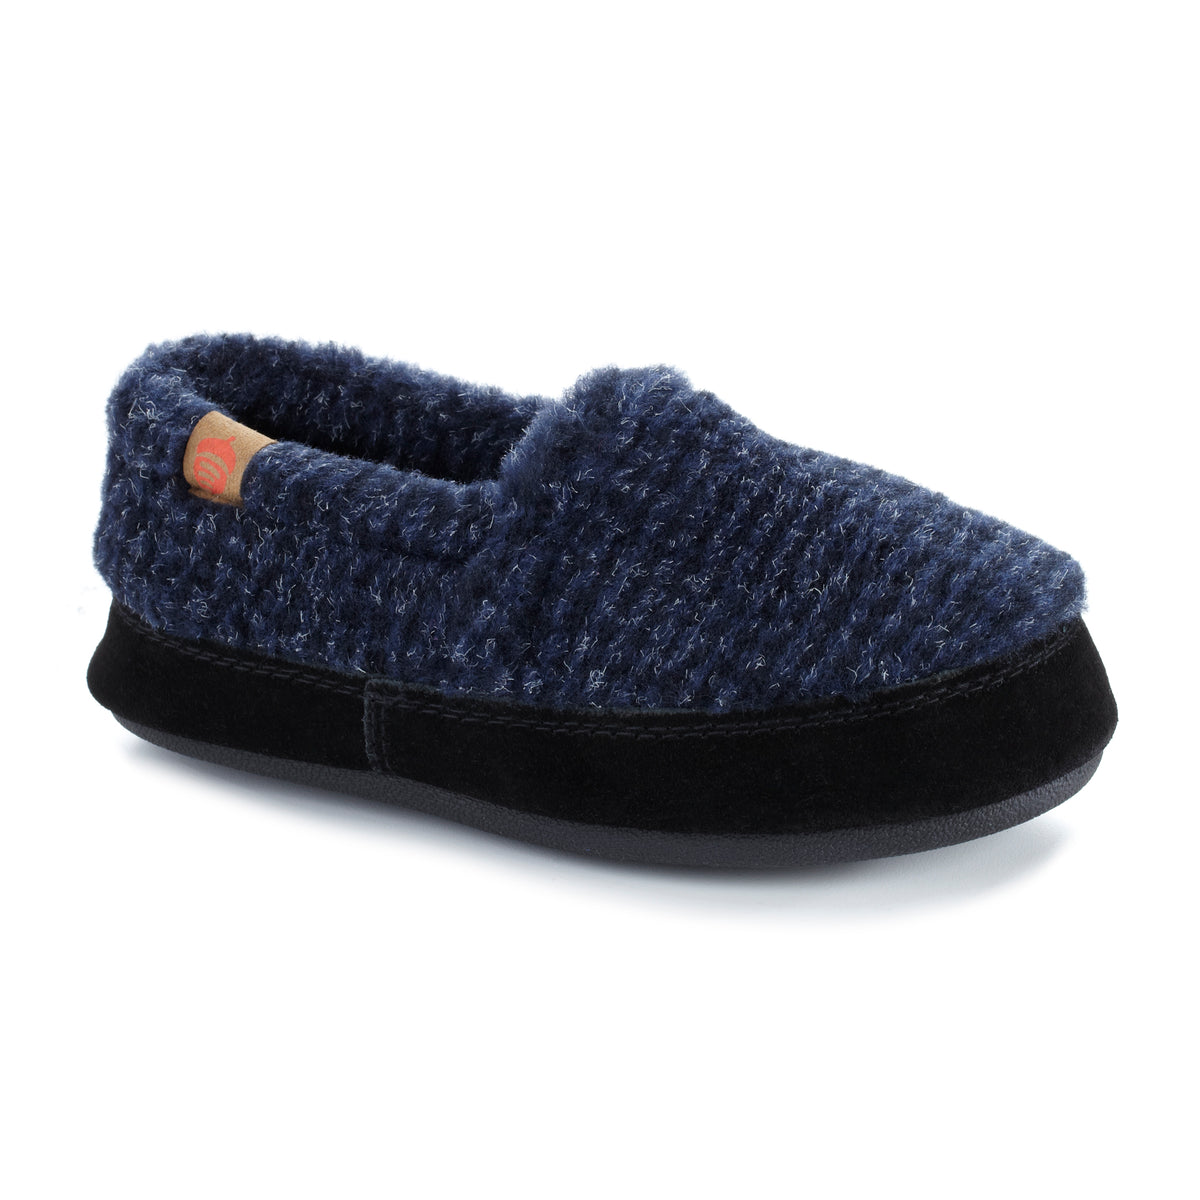 Kid's Original Acorn Moccasins in Navy Check Right Angled View